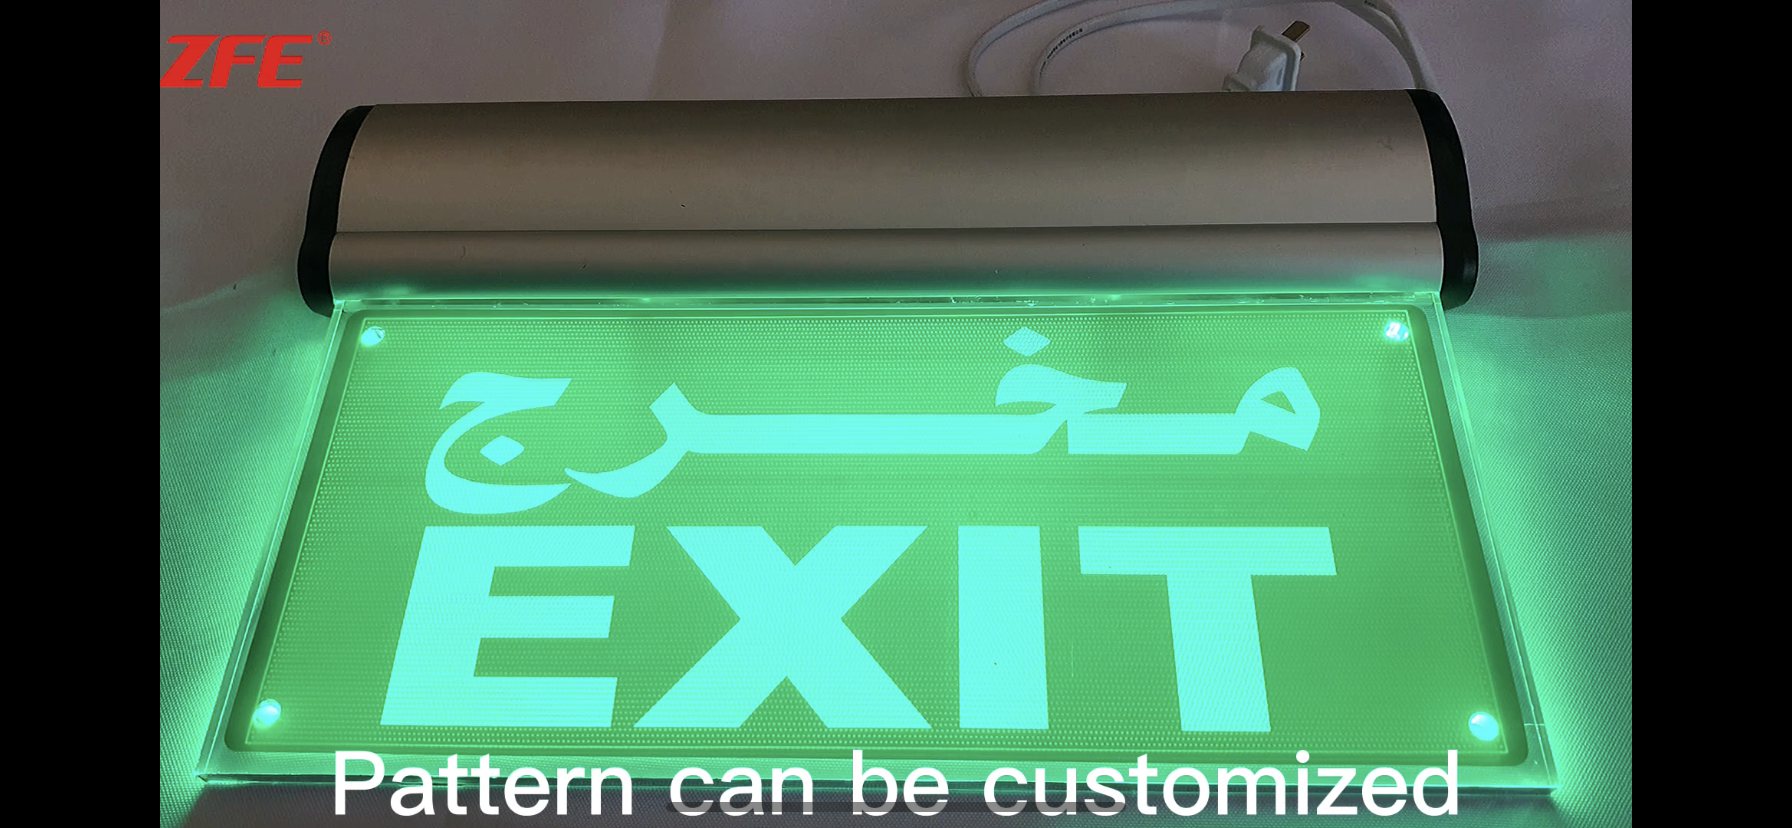 ZFE Wholesale ZF-800S Emergency exit sign light with a good price made by Guangdong Zhenhui Supplier